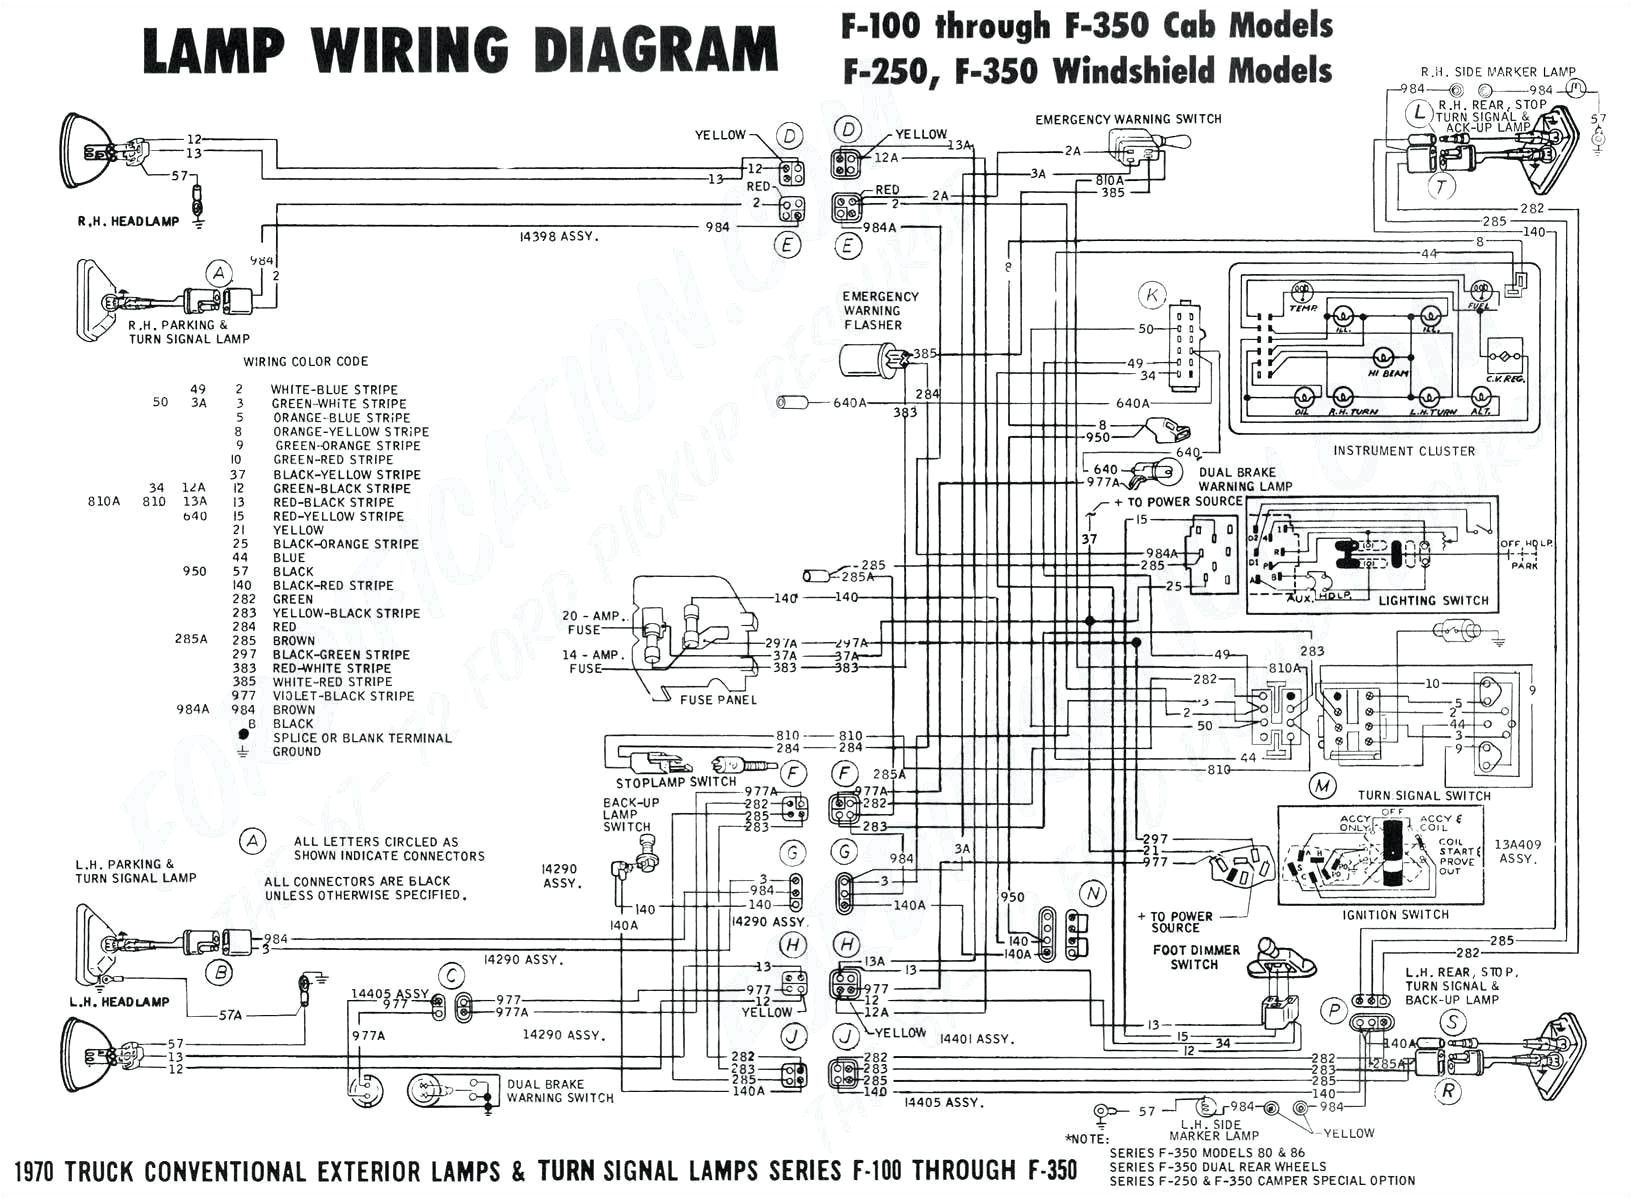 dodge neon alternator wiring electricity site here39s the diagram for the horn circuit for a 3996 impreza but i bet